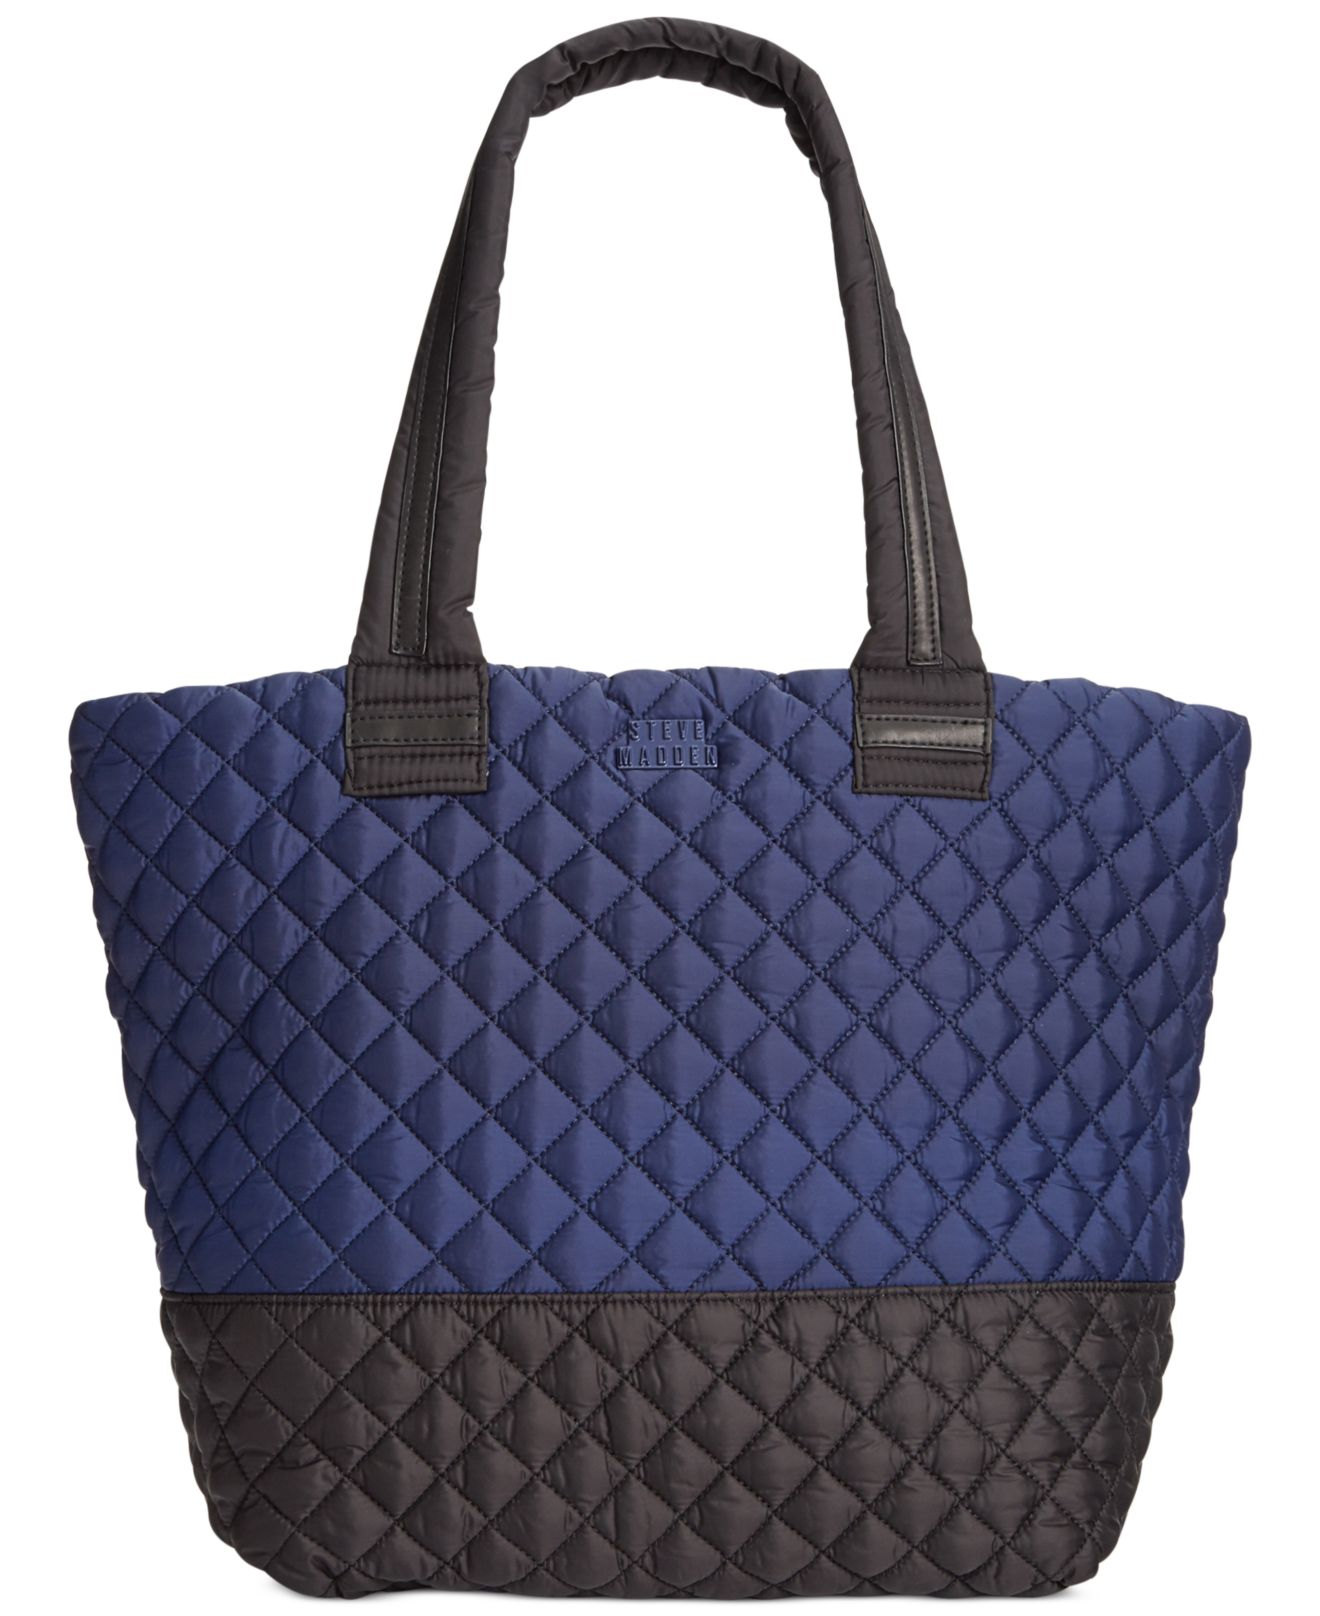 Steve Madden Broverr Quilted Active Tote in Blue - Lyst